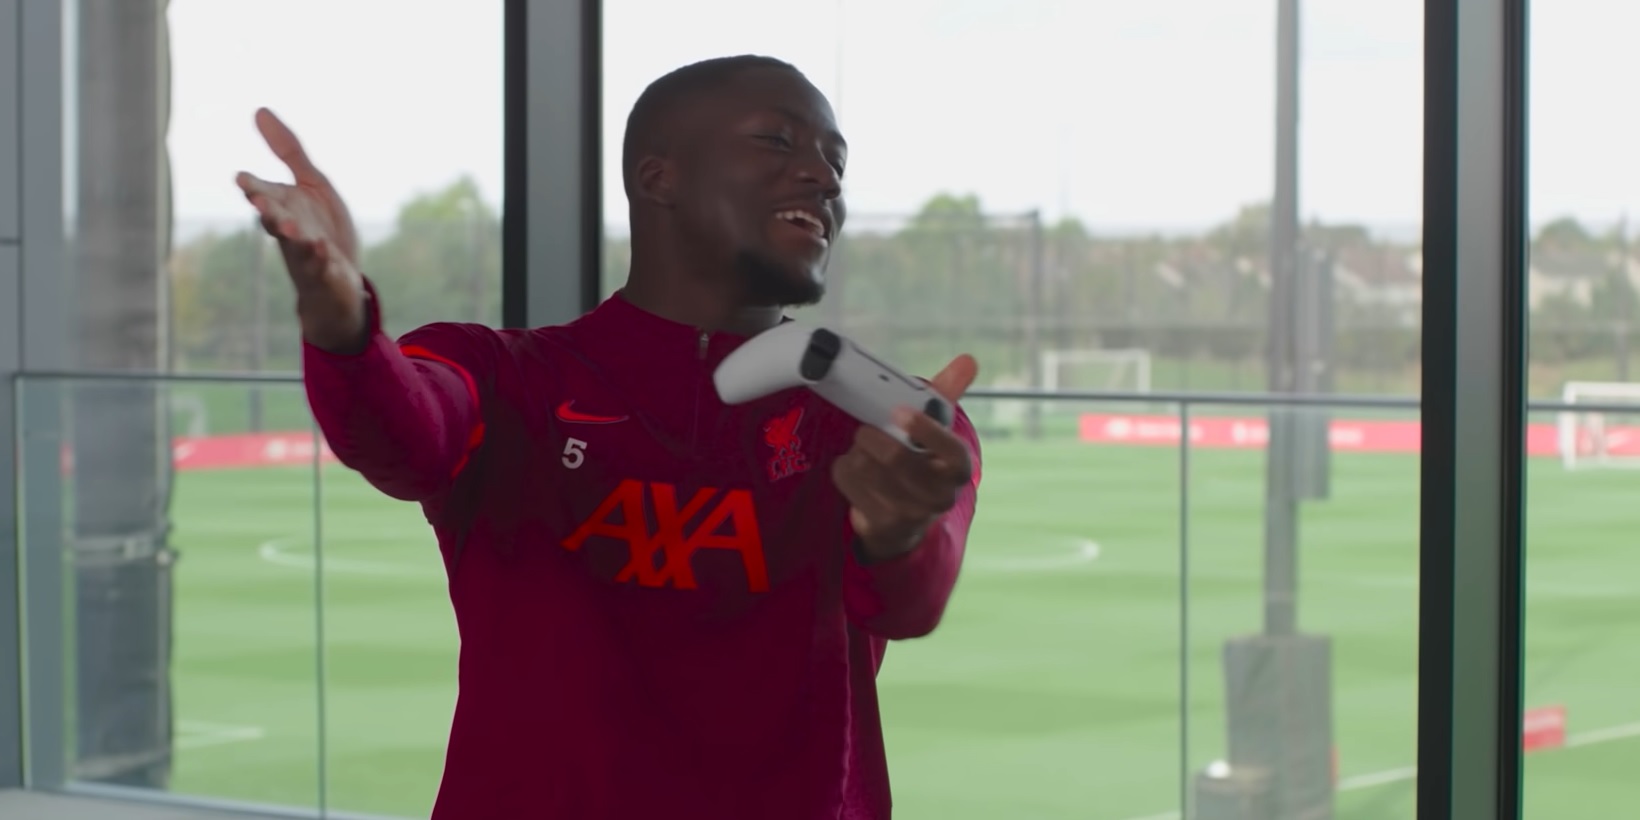 (Video) ‘No, no, no’ – Watch Konate getting annoyed at FIFA after challenge disadvantage